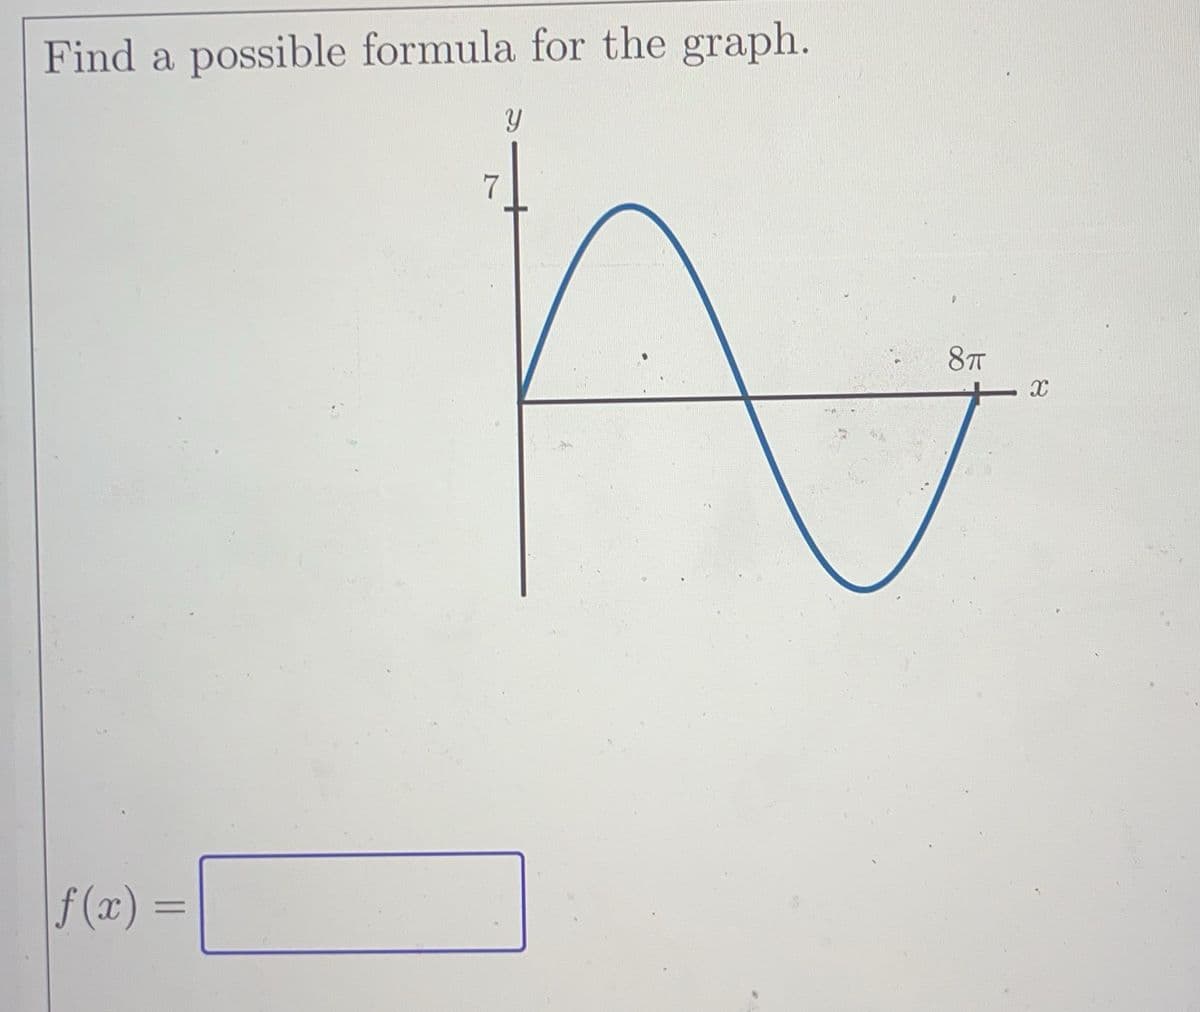 Find a possible formula for the graph.
f(x) =
A
8TT
X